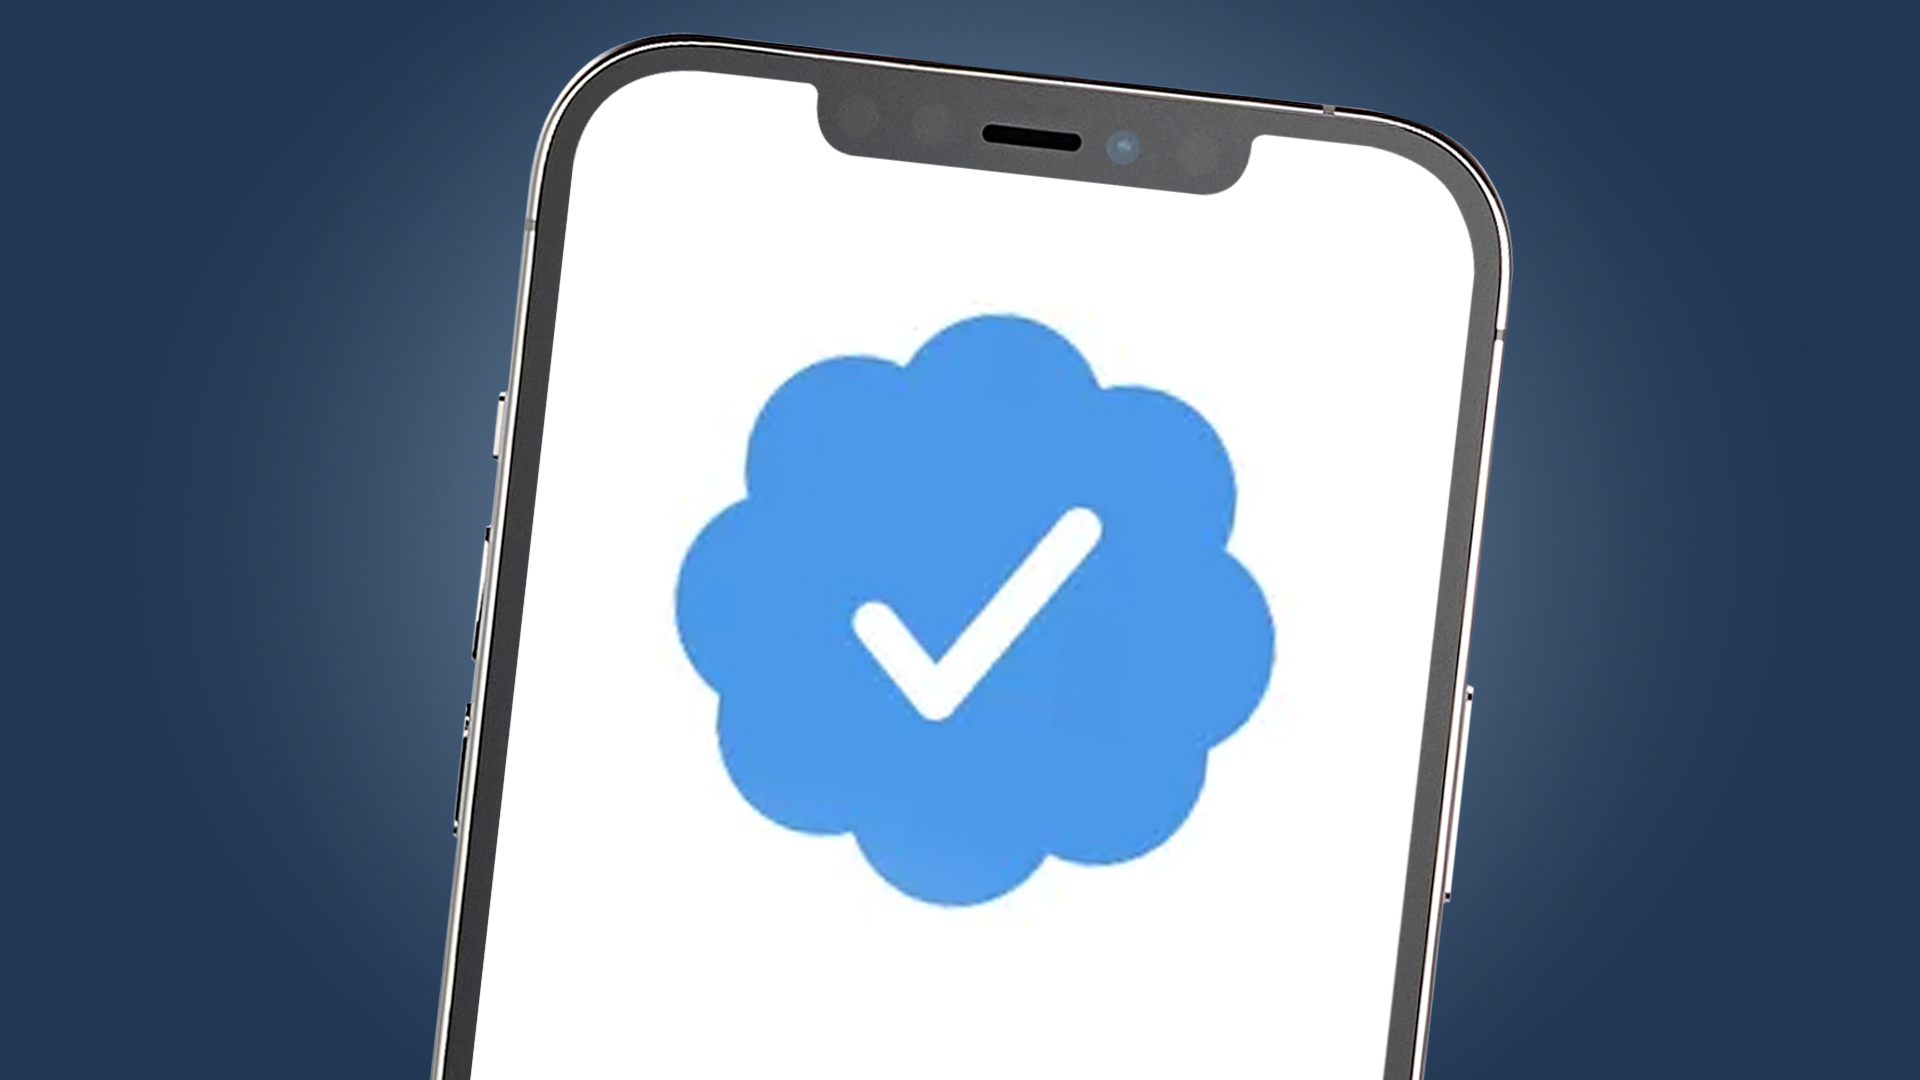 Twitter’s next big move could be to introduce an ID verified badge